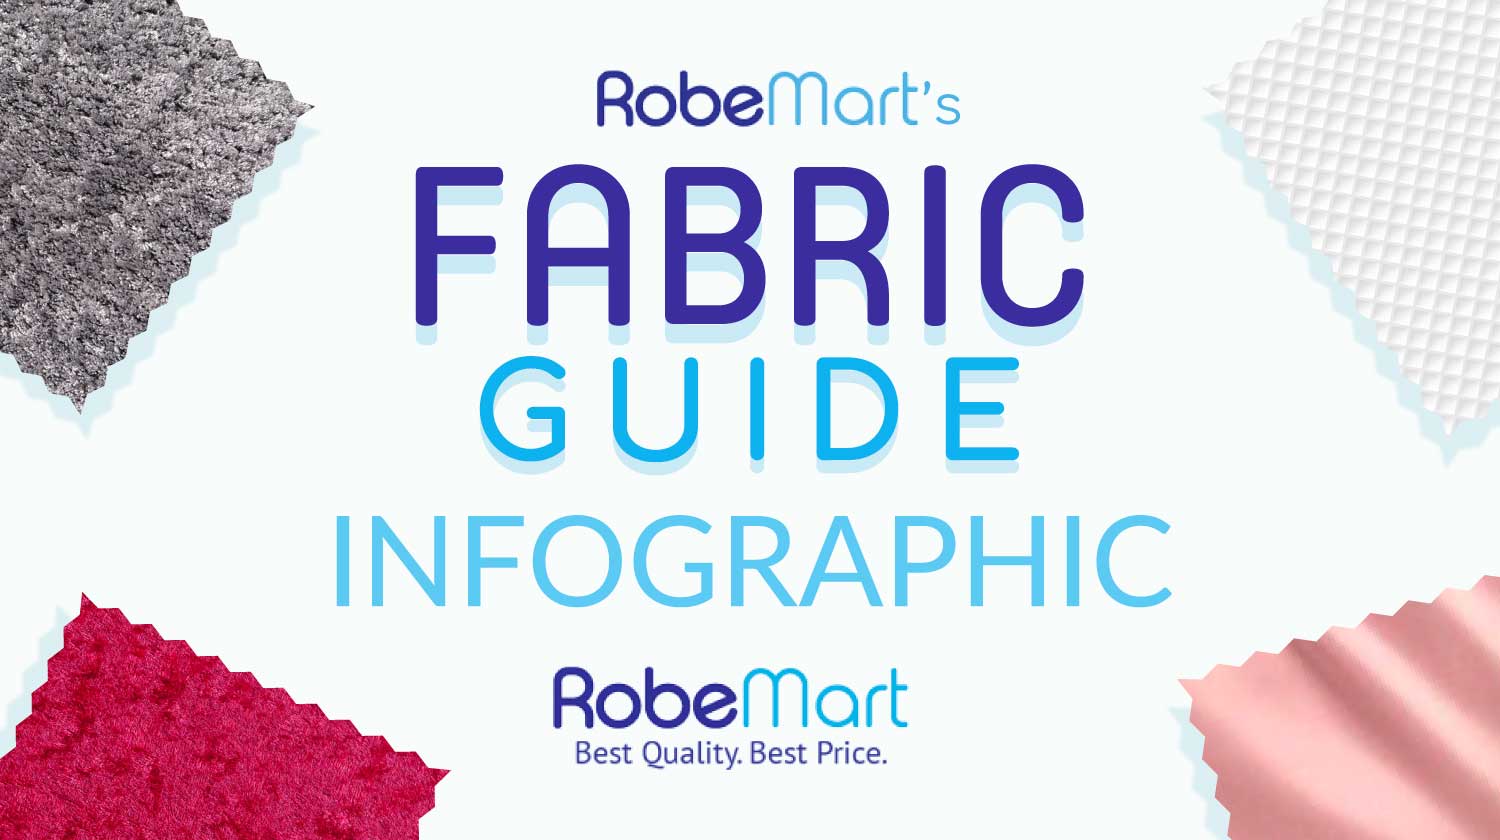 30 Types of Fabric Patterns: Simple Guide to Your Interior